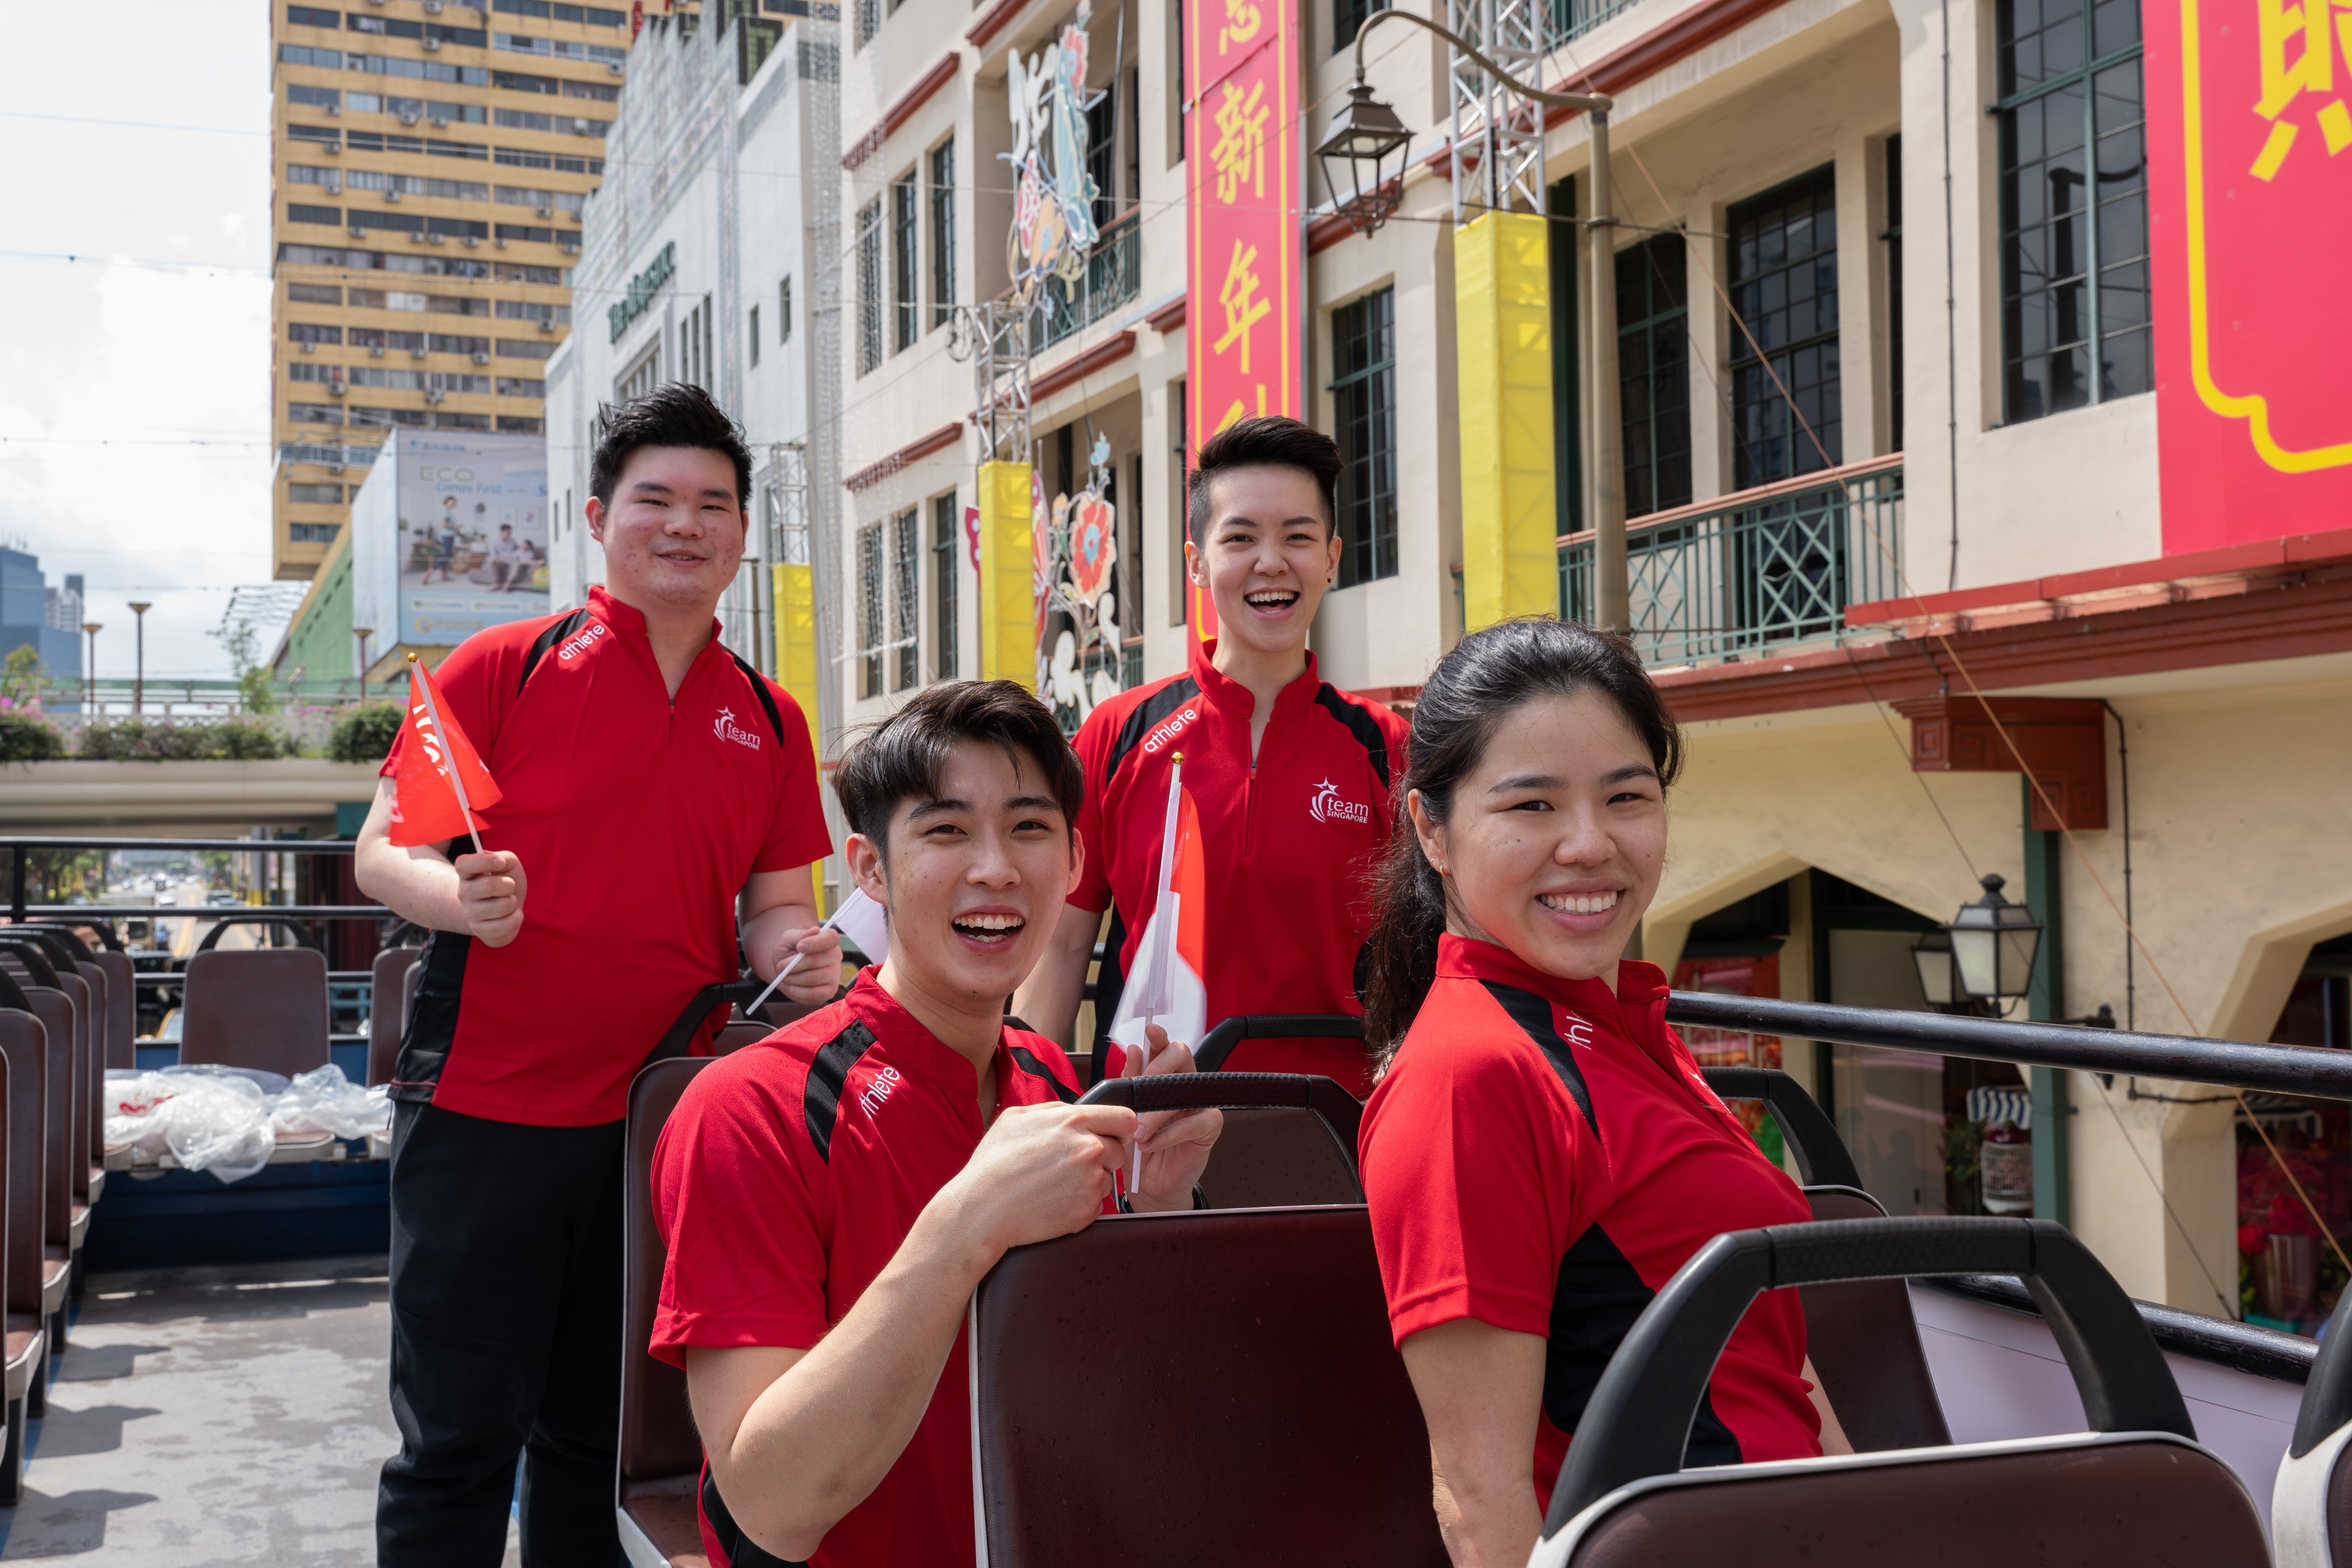 Athletes on the open-top bus passing by Chinatown